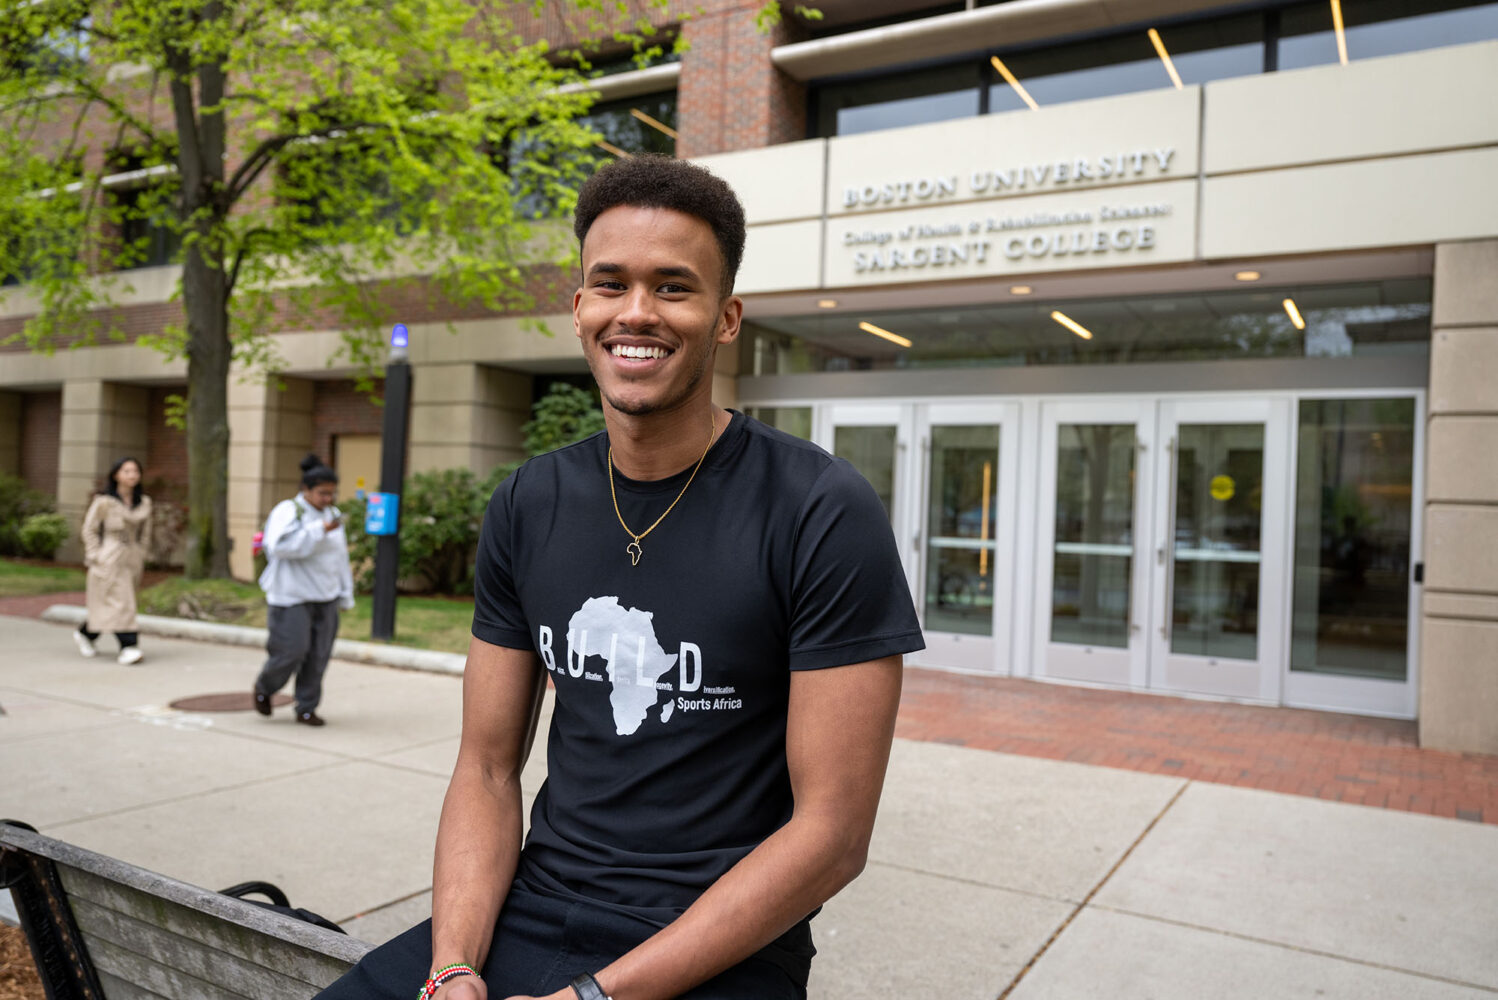 Photo: A picture of a man smiling and posing in front of a Boston University building